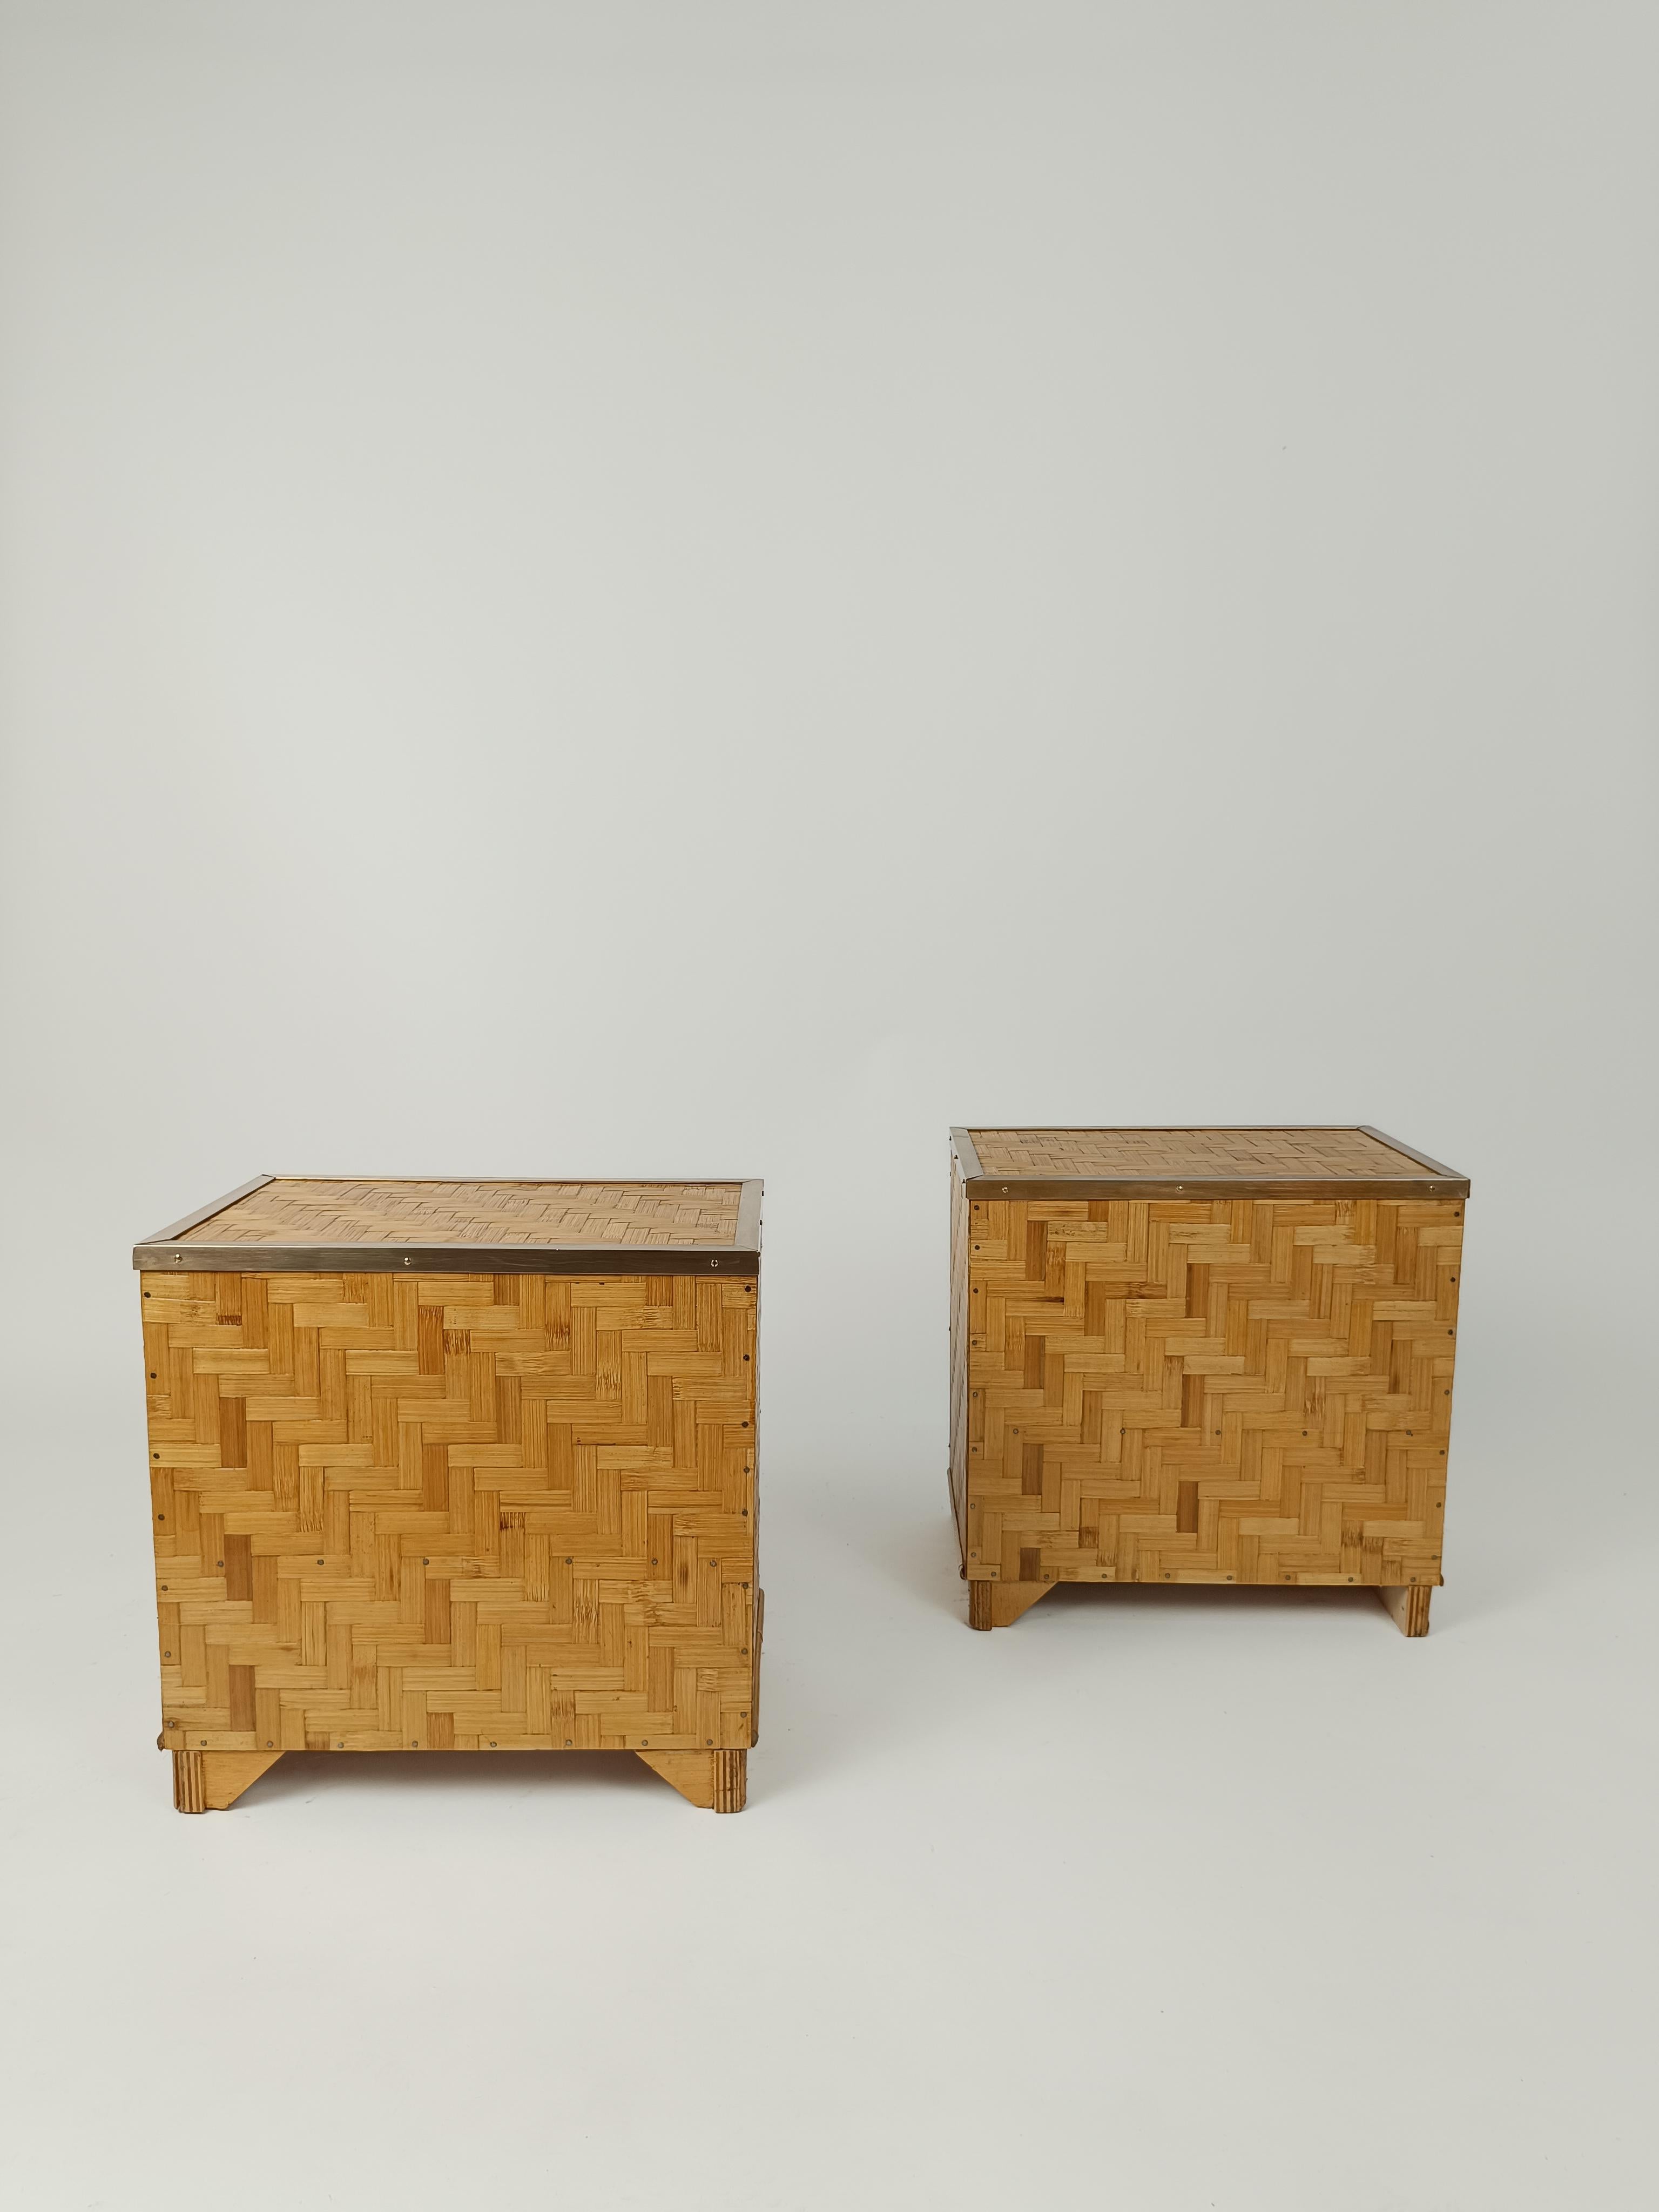 Midcentury Italian Bedside Tables in Bamboo Cane, Rattan and Brass, 1970s For Sale 2